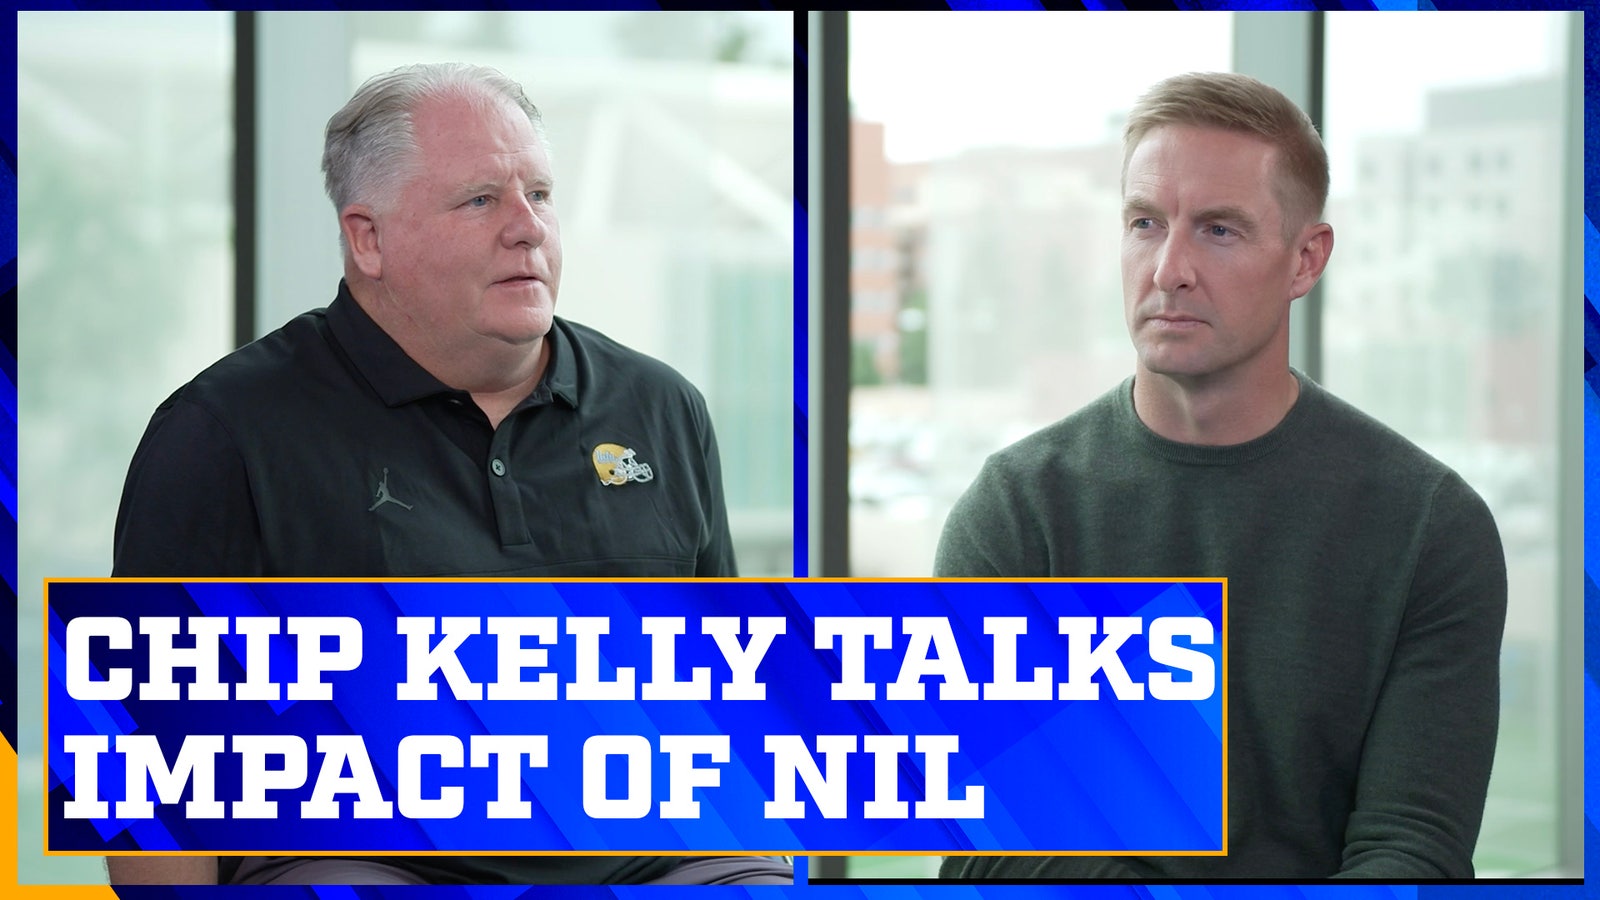 UCLA's Chip Kelly talks about the impact of NIL in college football